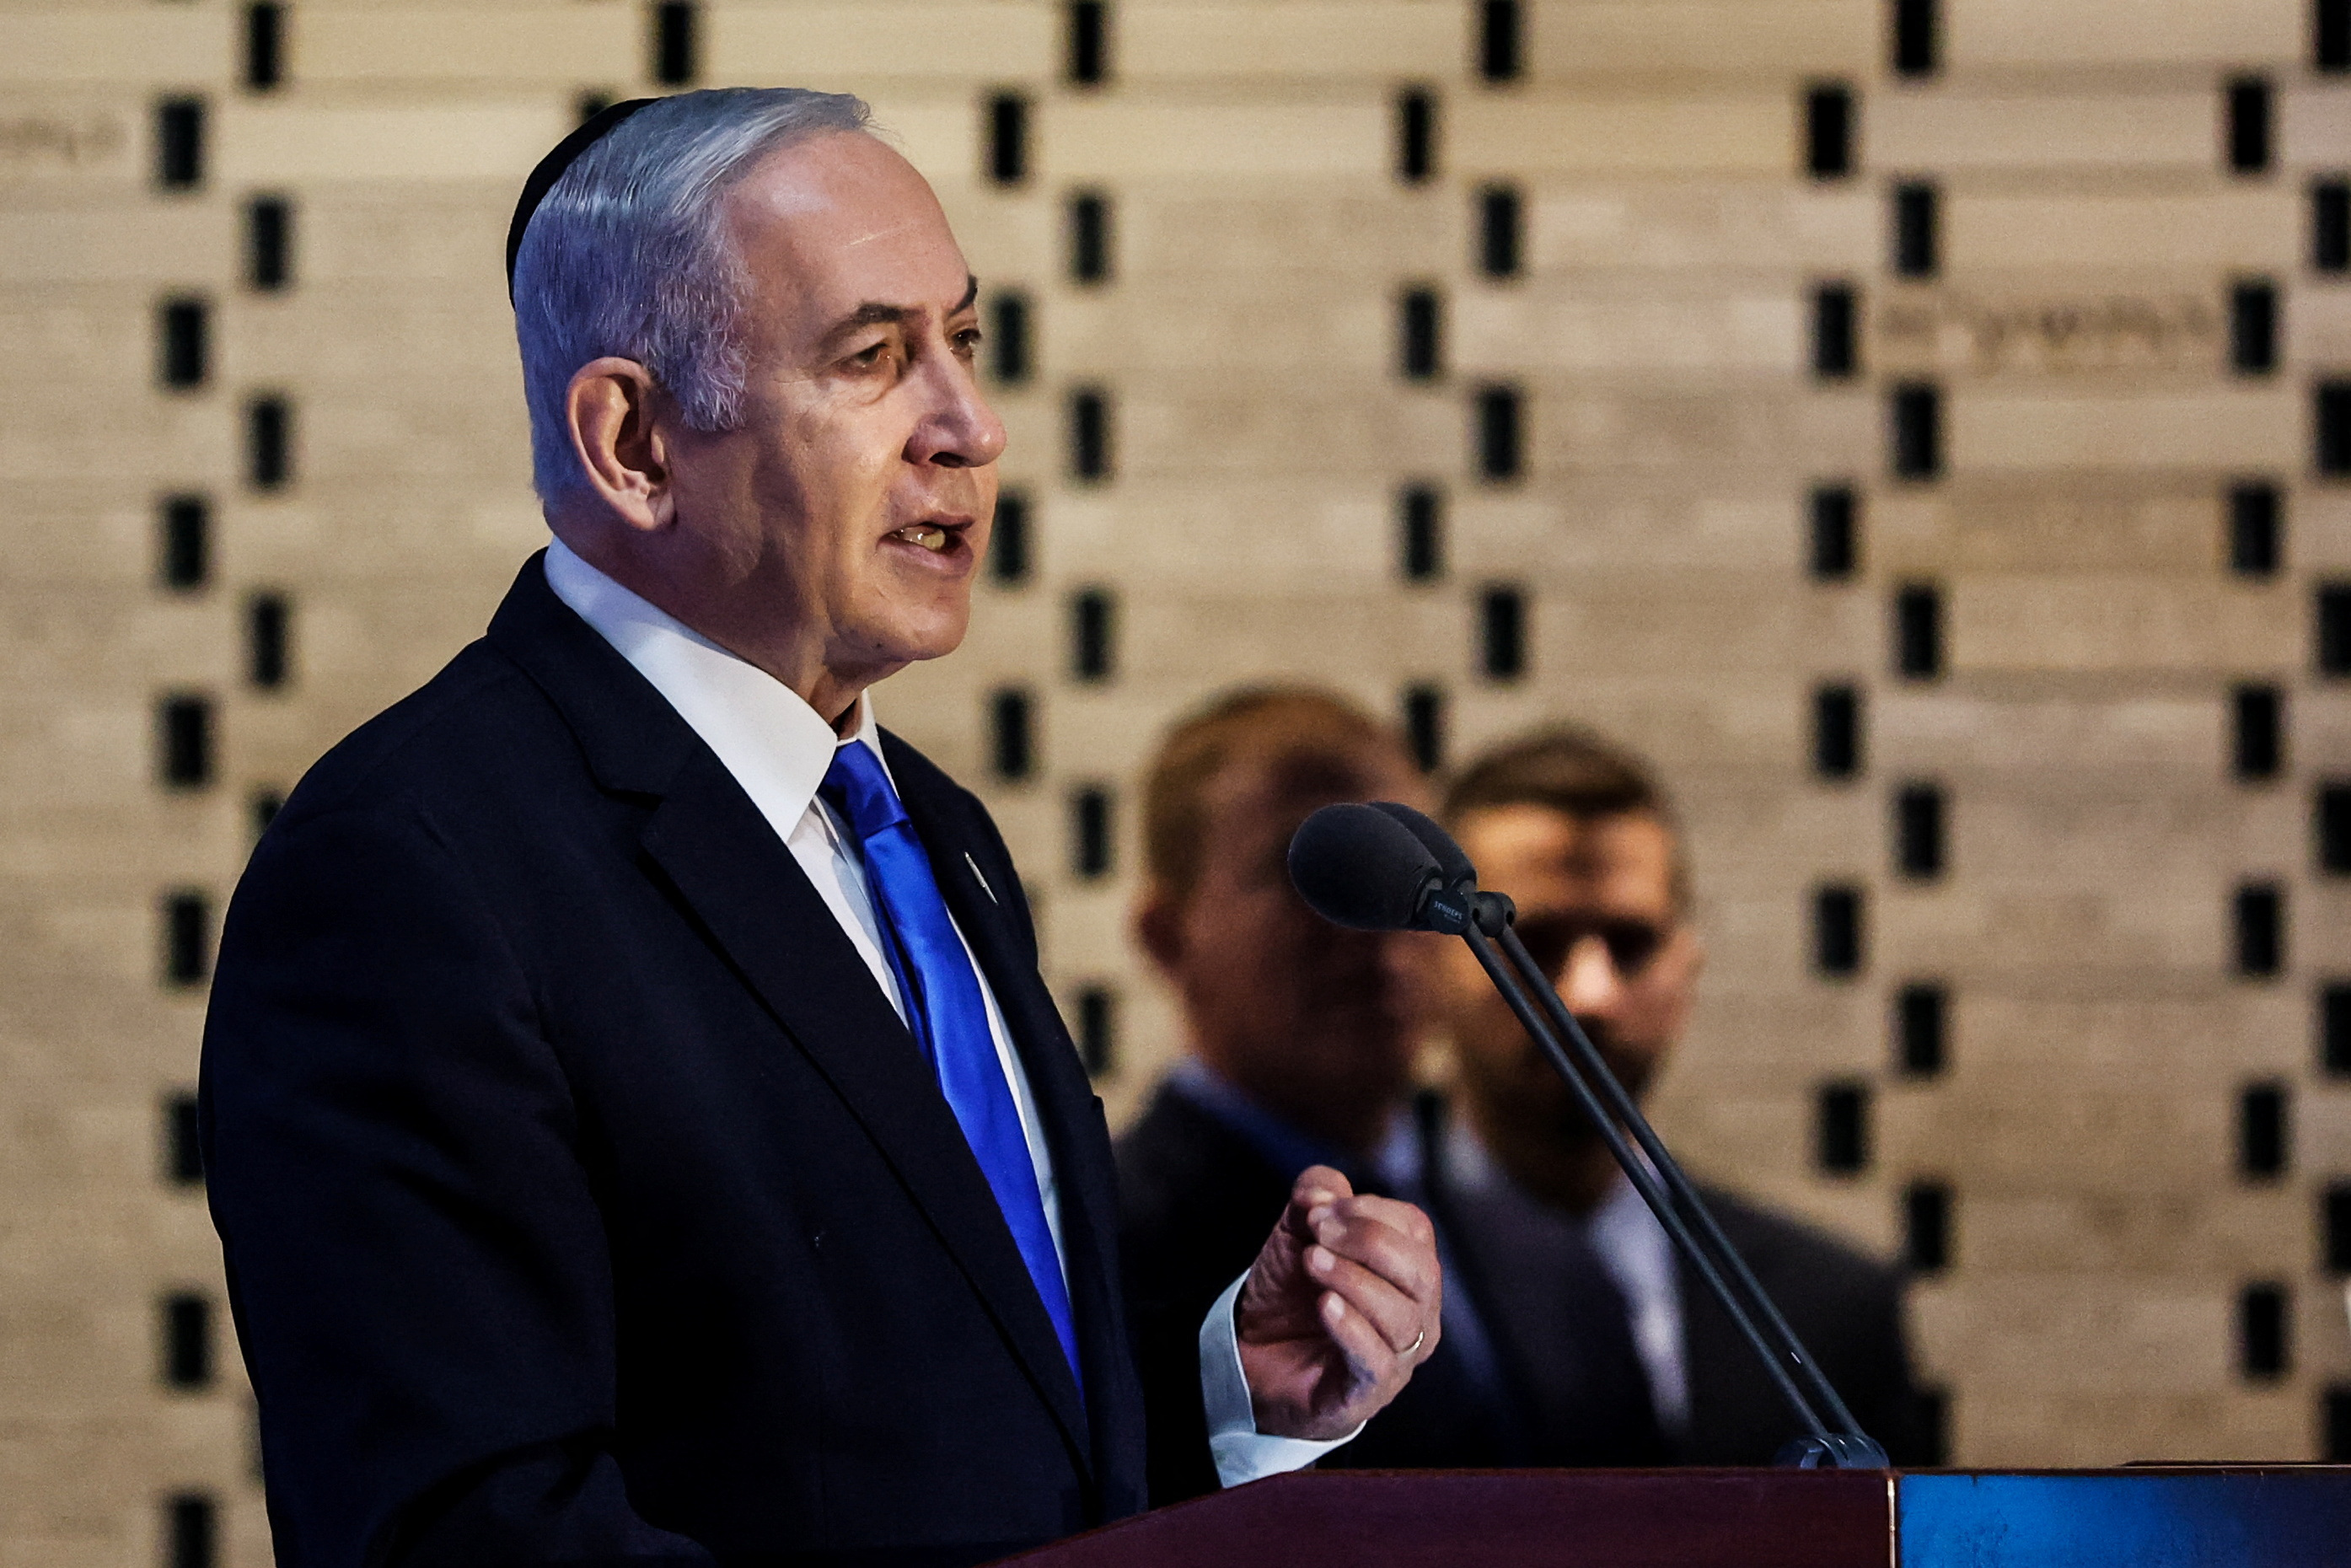 Israeli Prime Minister Benjamin Netanyahu speaks at a memorial ceremony for Israeli soldiers killed in the 1973 Middle East War at Mount Herzl Military Cemetery in Jerusalem